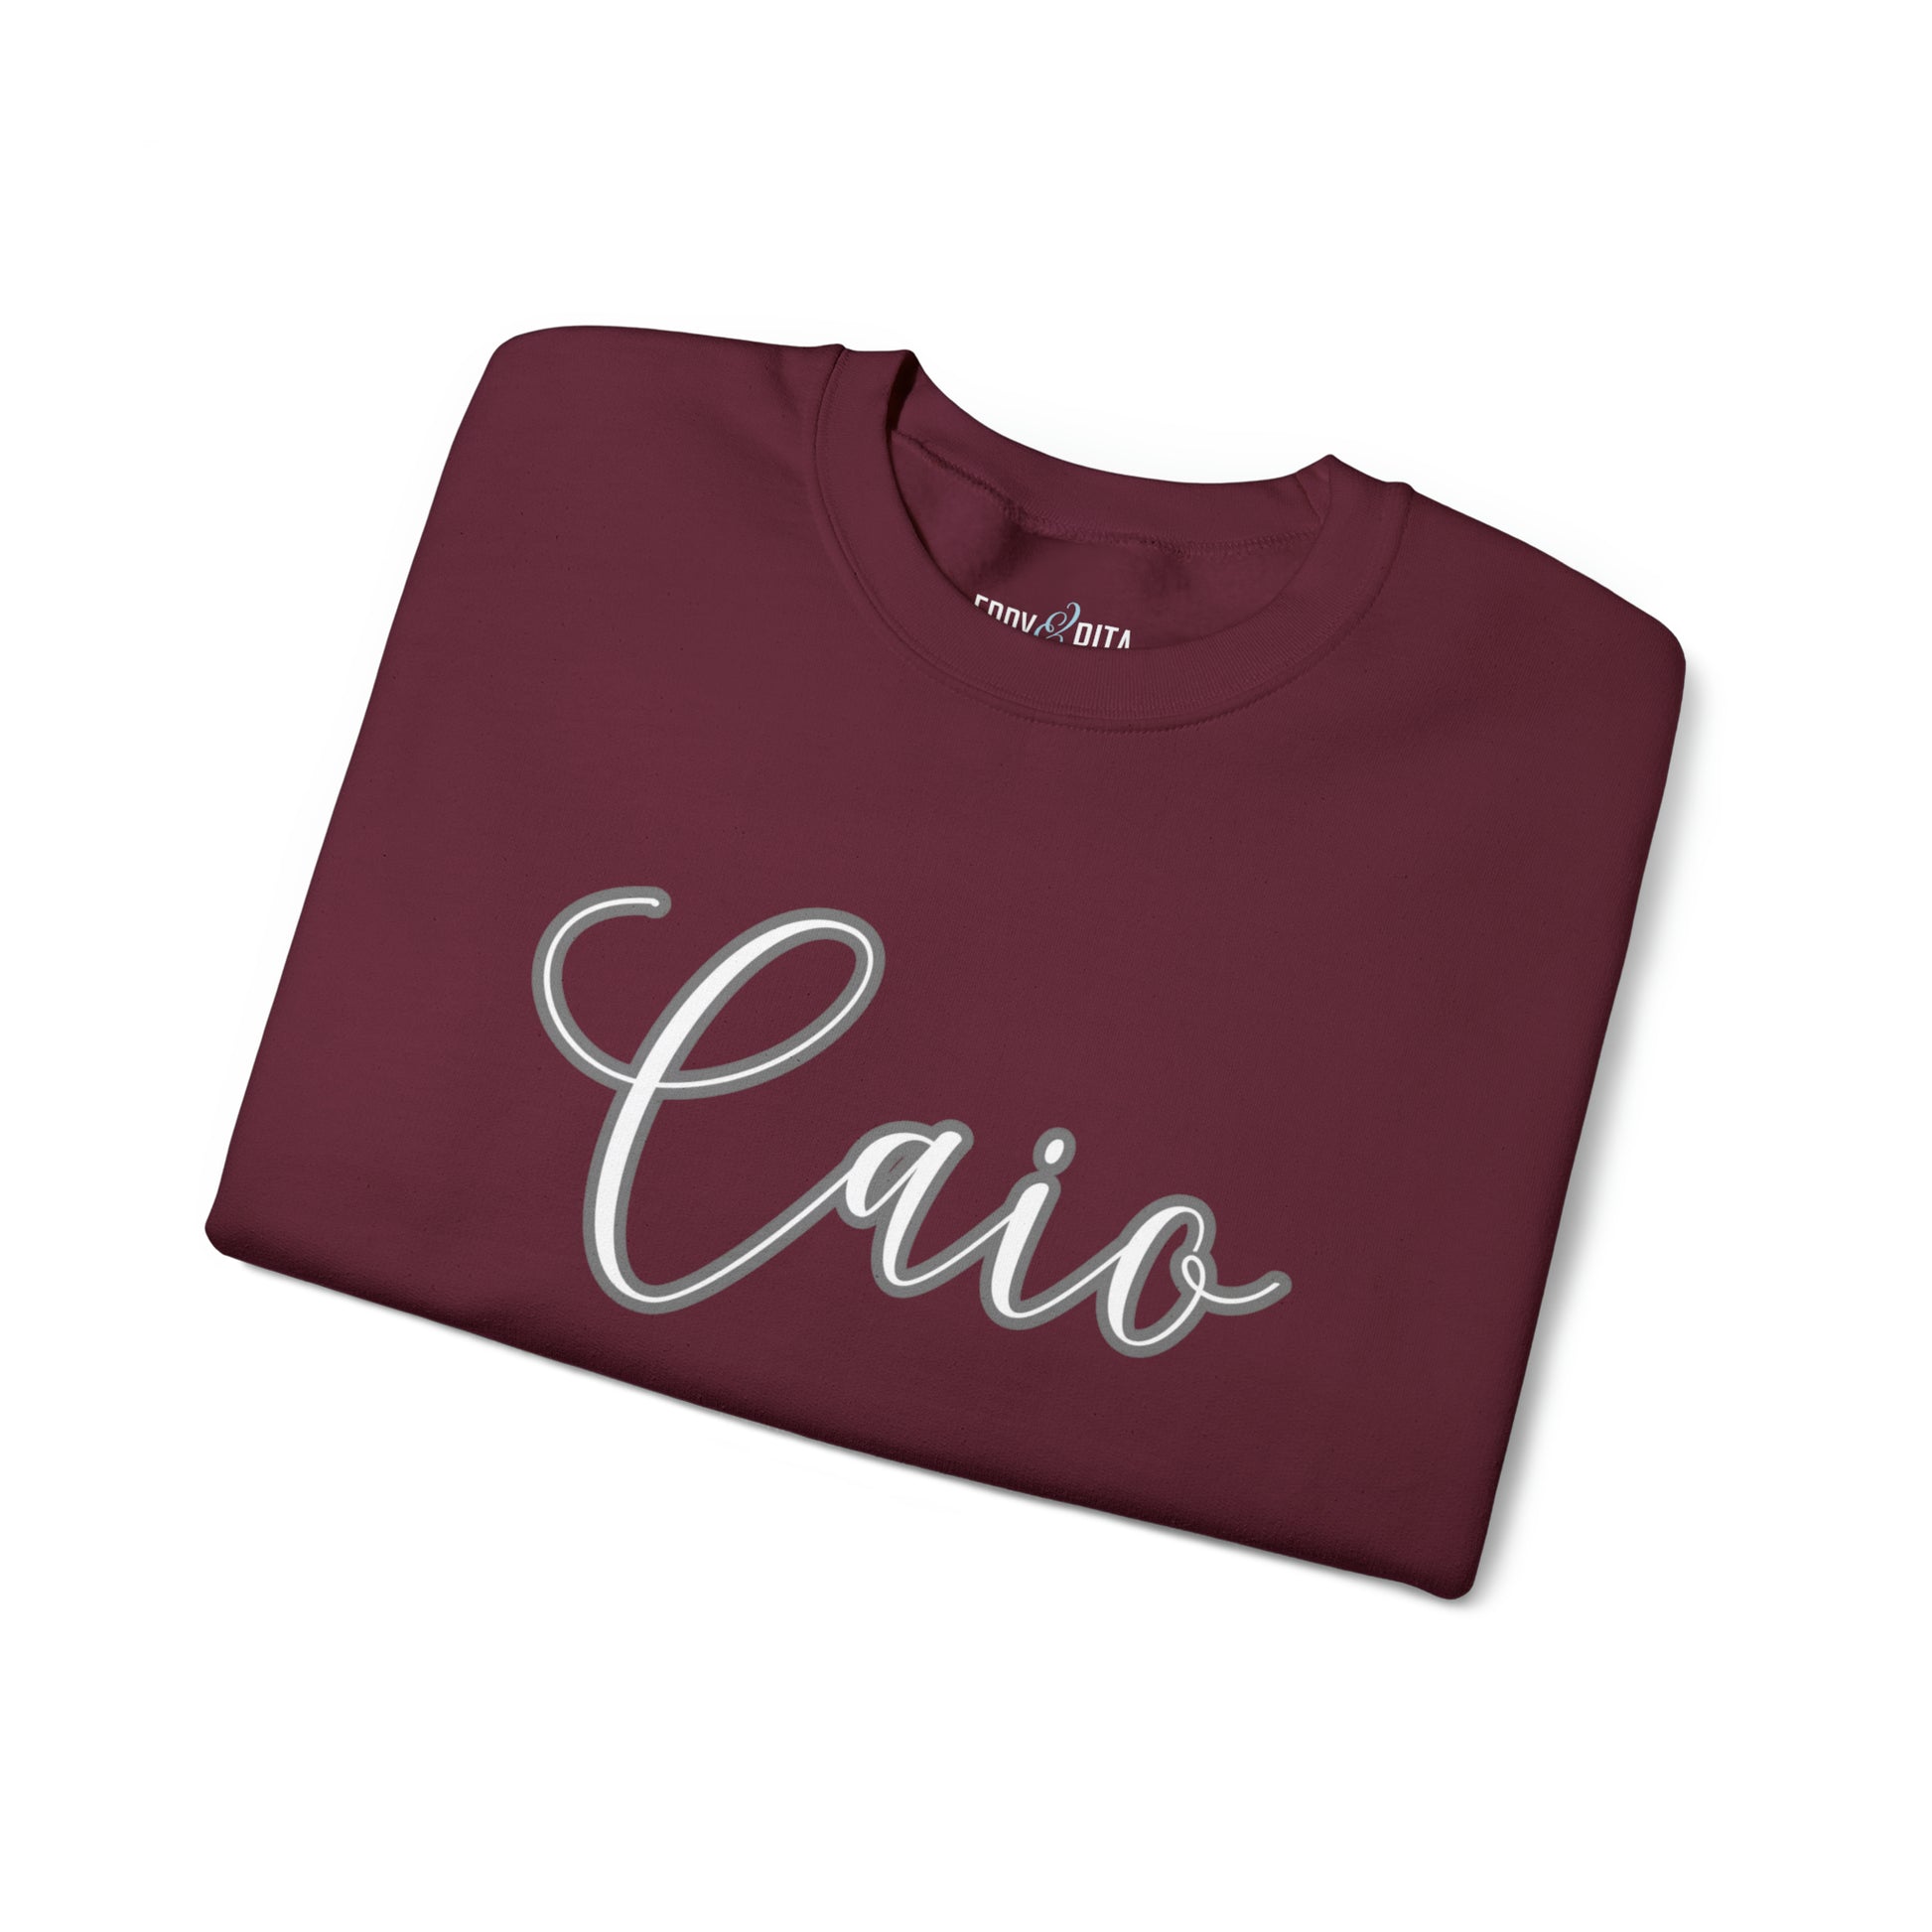 Ciao Chic: Women's Comfort Sweatshirt for Effortless Style - Eddy and Rita